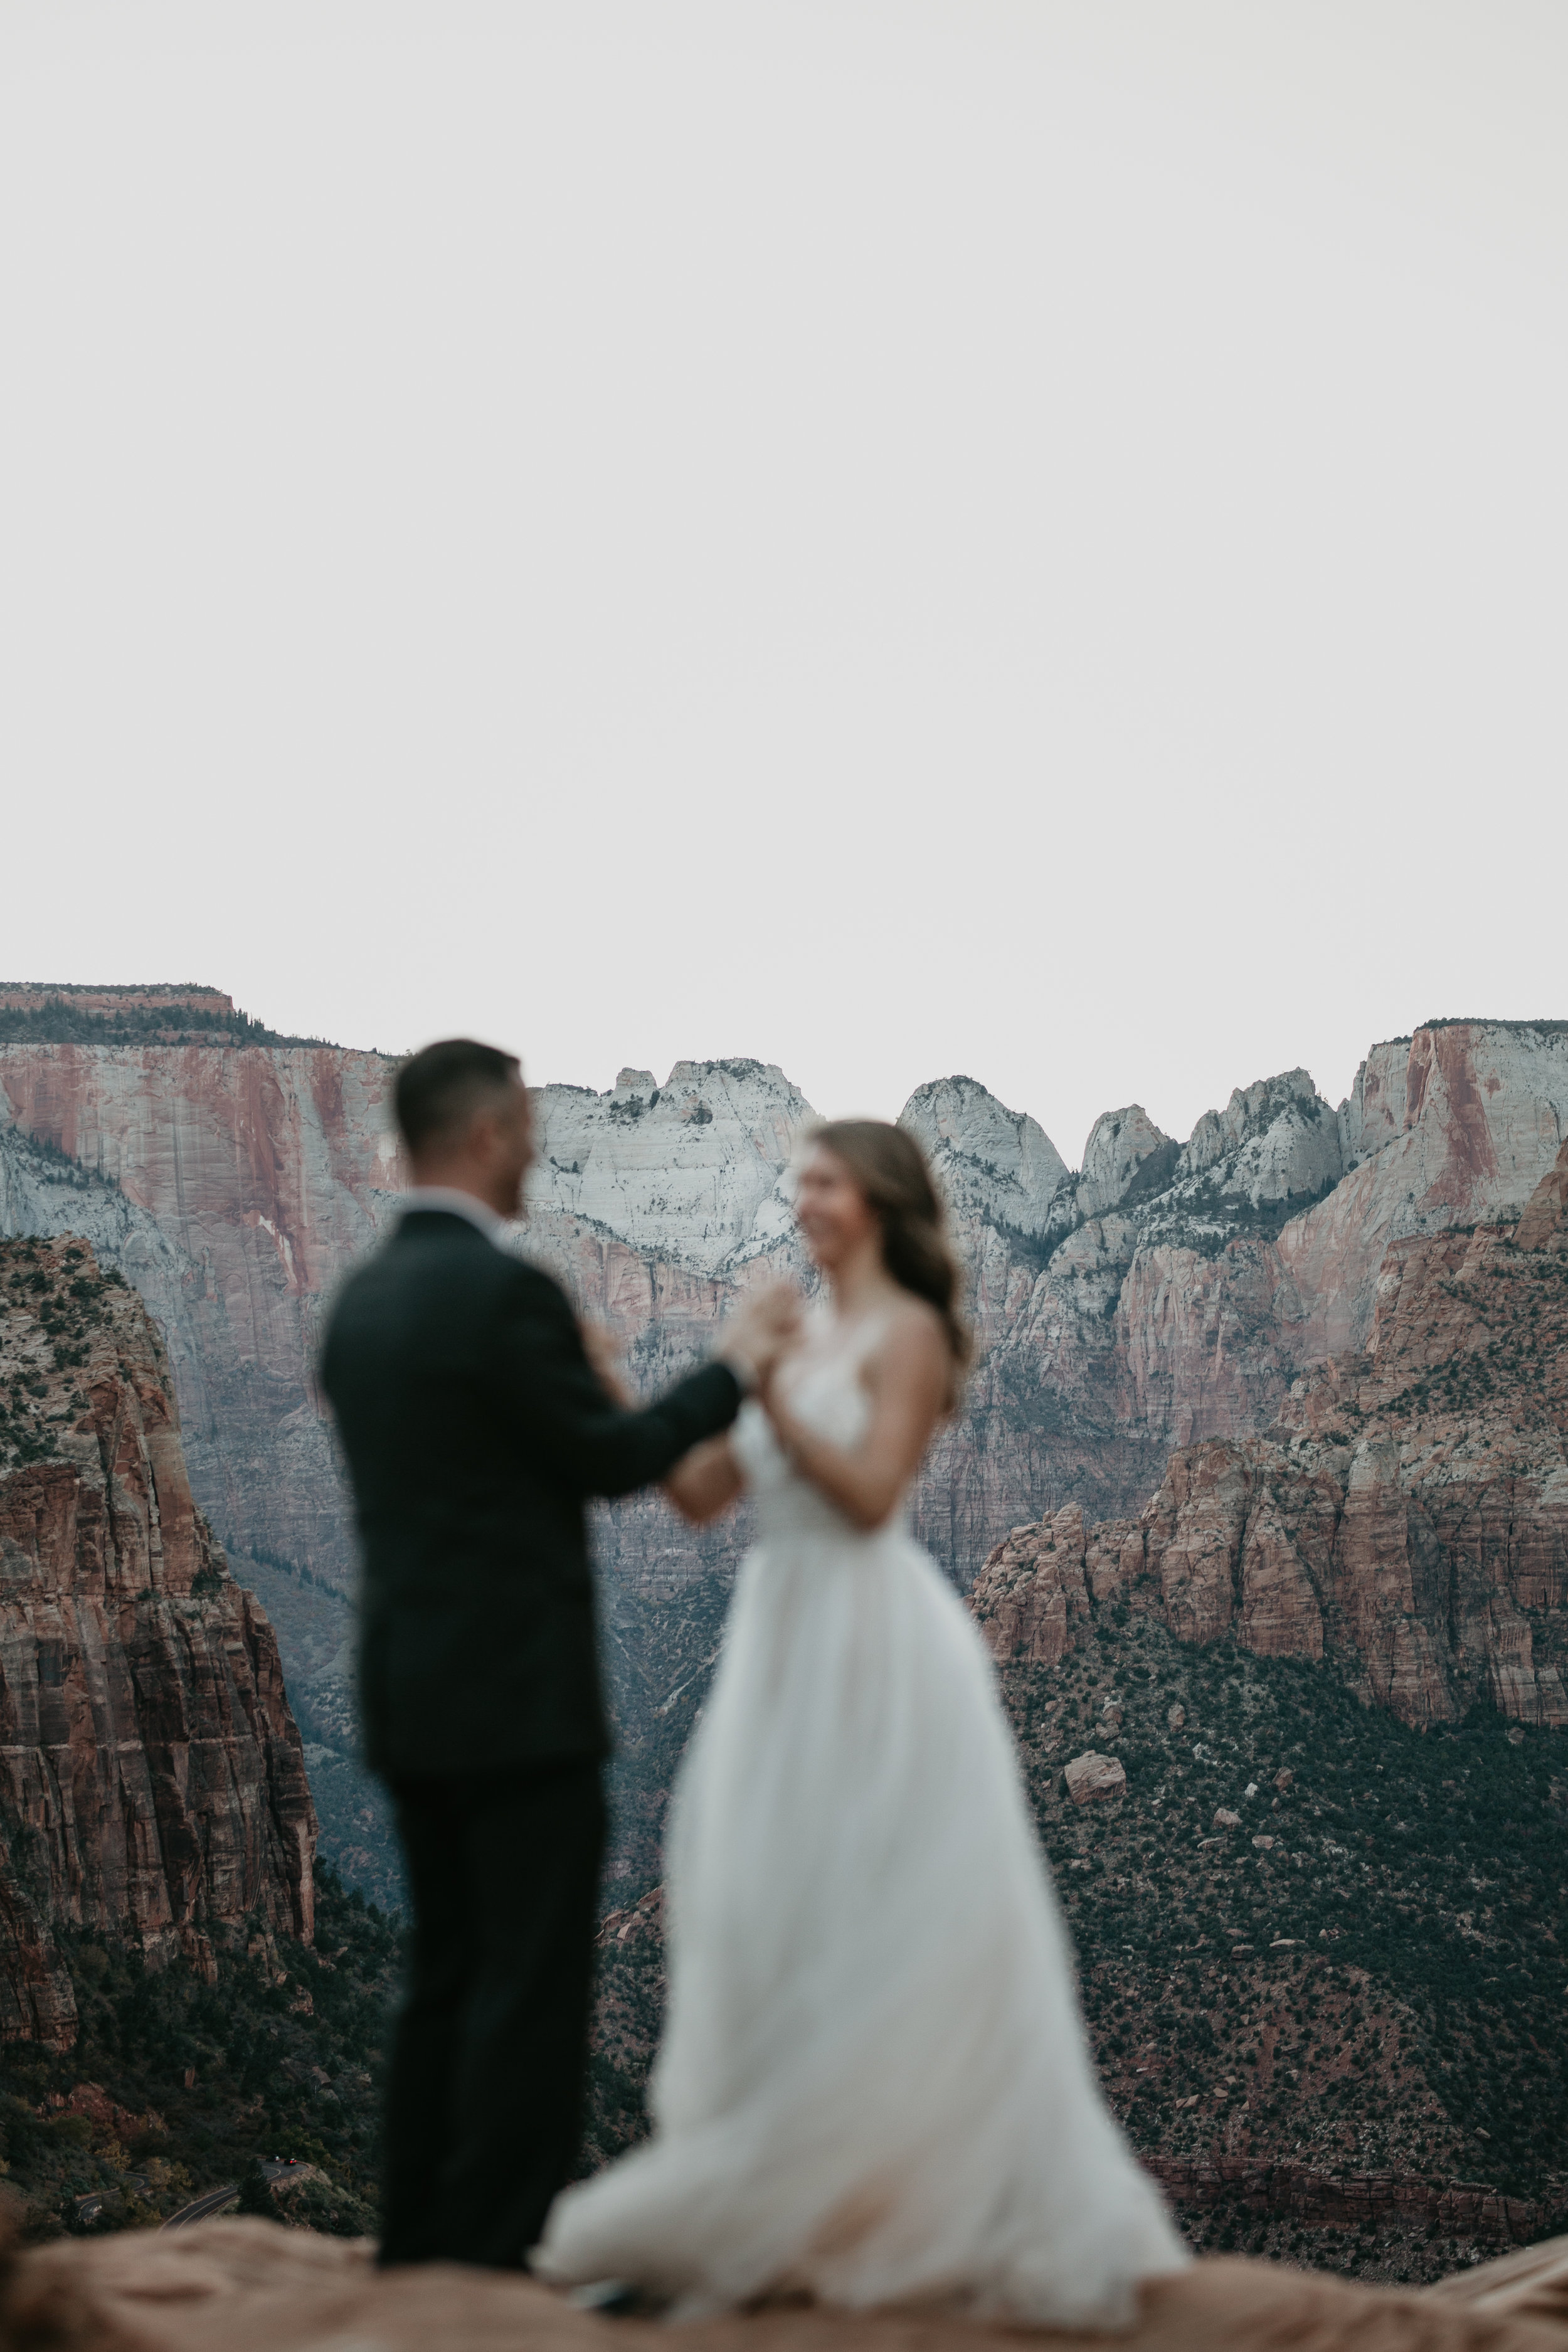 nicole-daacke-photography-zion-national-park-elopement-photographer-canyon-overlook-trail-elope-hiking-adventure-wedding-photos-fall-utah-red-rock-canyon-stgeorge-eloping-photographer-79.jpg